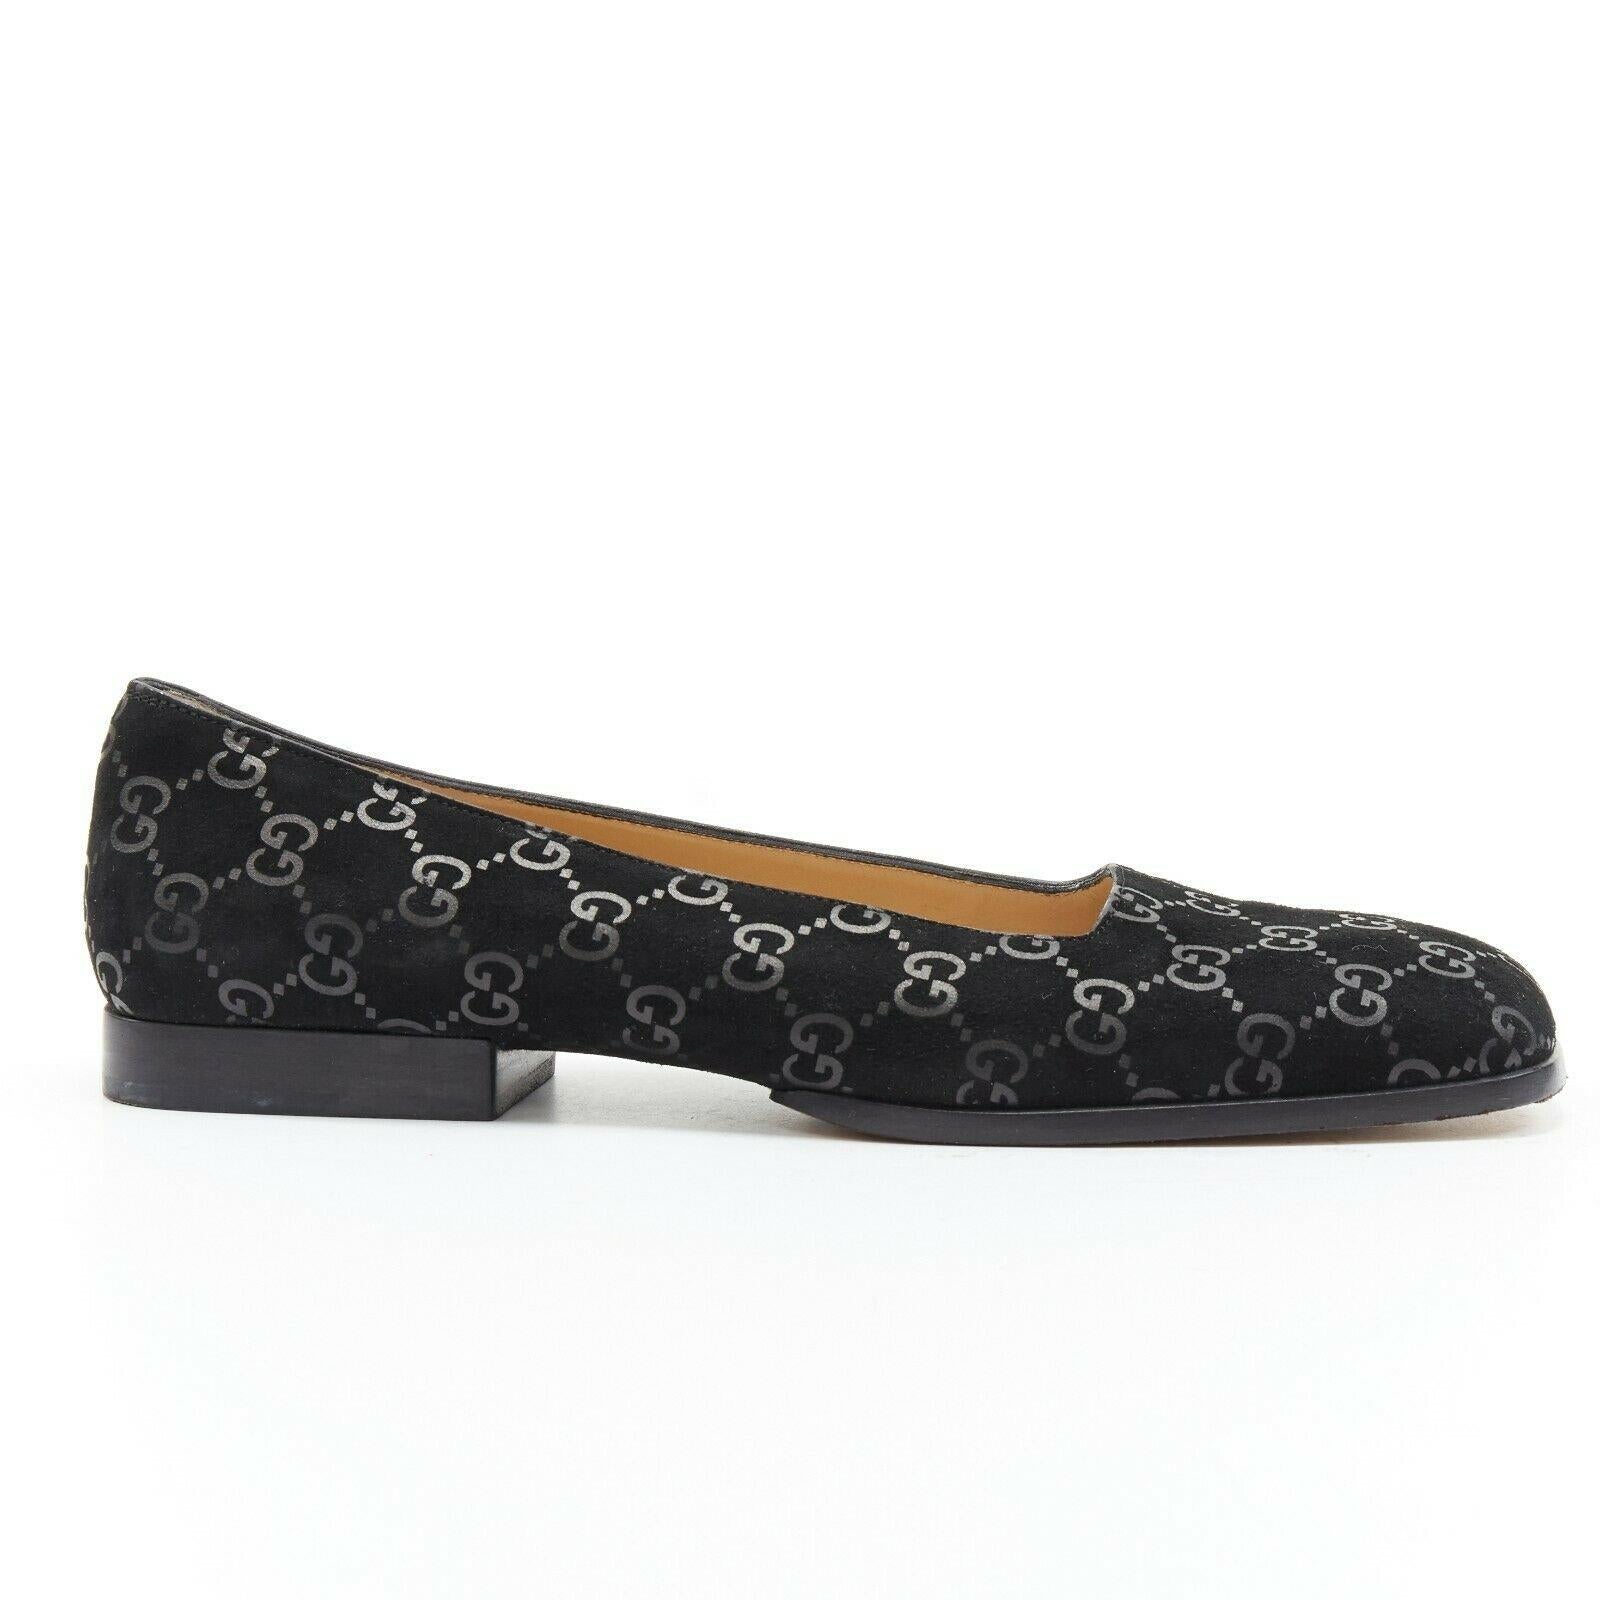 GUCCI Vintage black monogram printed black suede square toe loafer EU36.5C 
Reference: TGAS/A03134 
Brand: Gucci 
Model: Loafer 
Material: Leather 
Color: Black 
Pattern: Other 
Extra Detail: Black suede leather. Tonal monogram printed on leather.